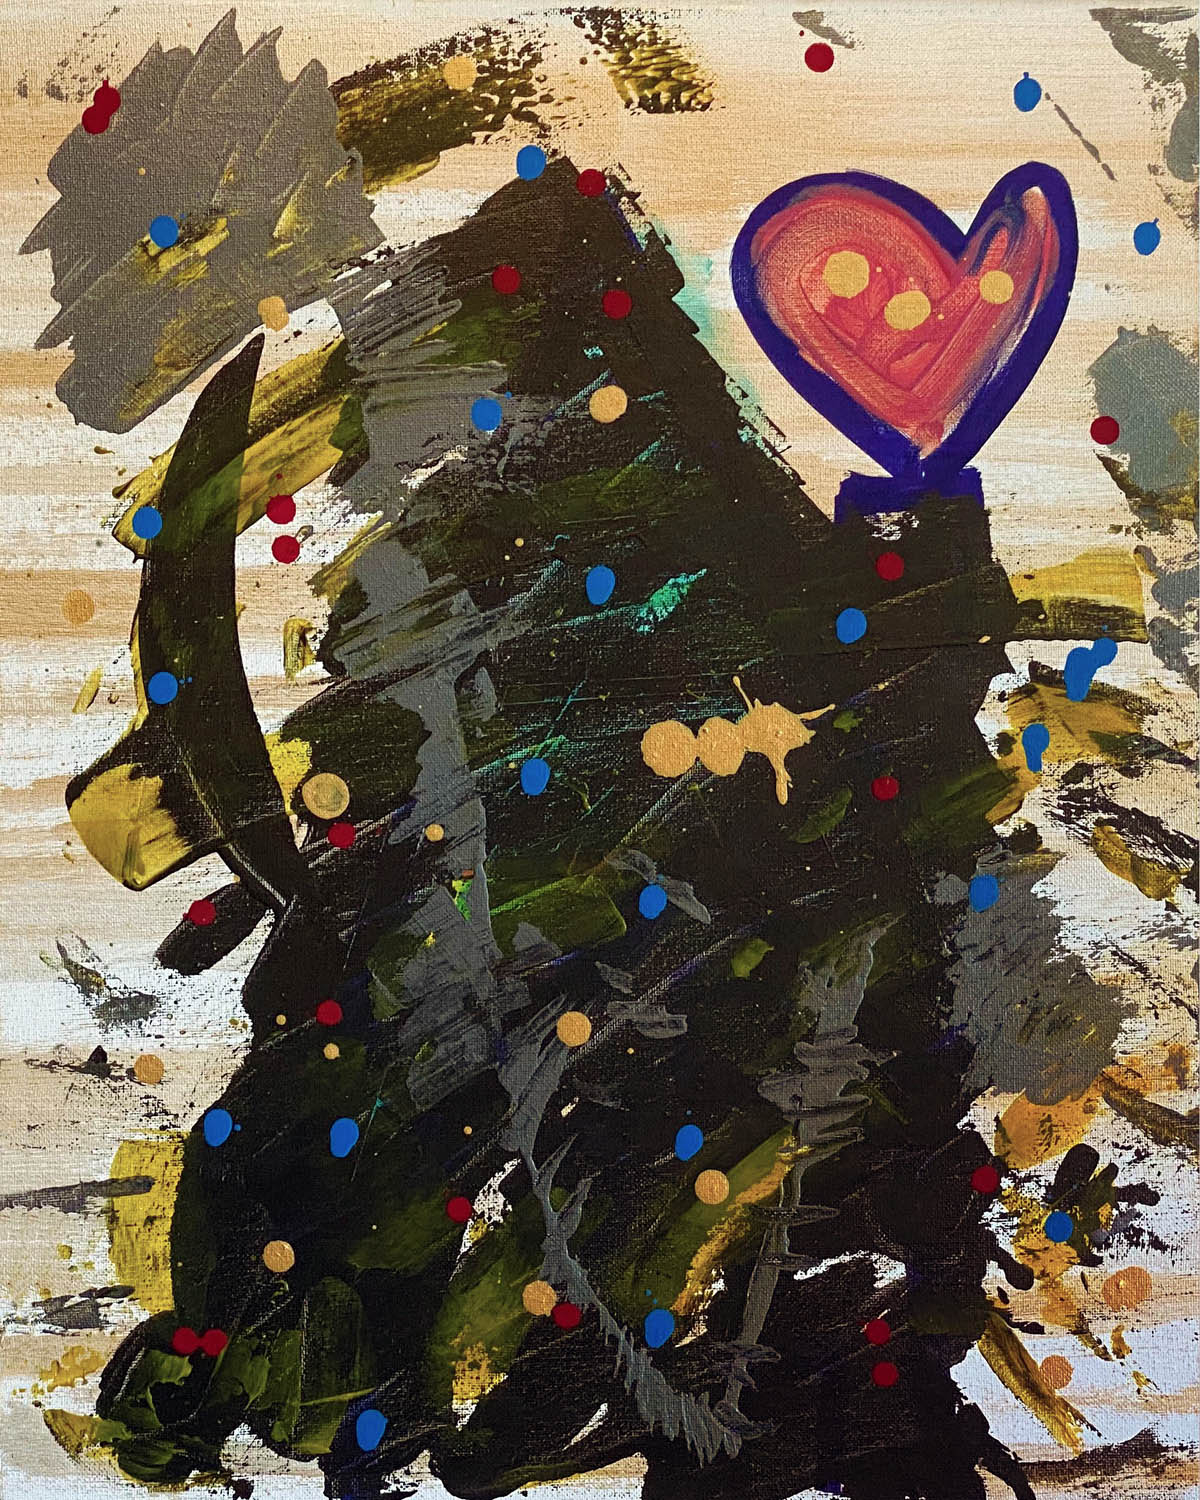 An abstract painting of mostly yellows and blacks with a red heart in the upper right corner.